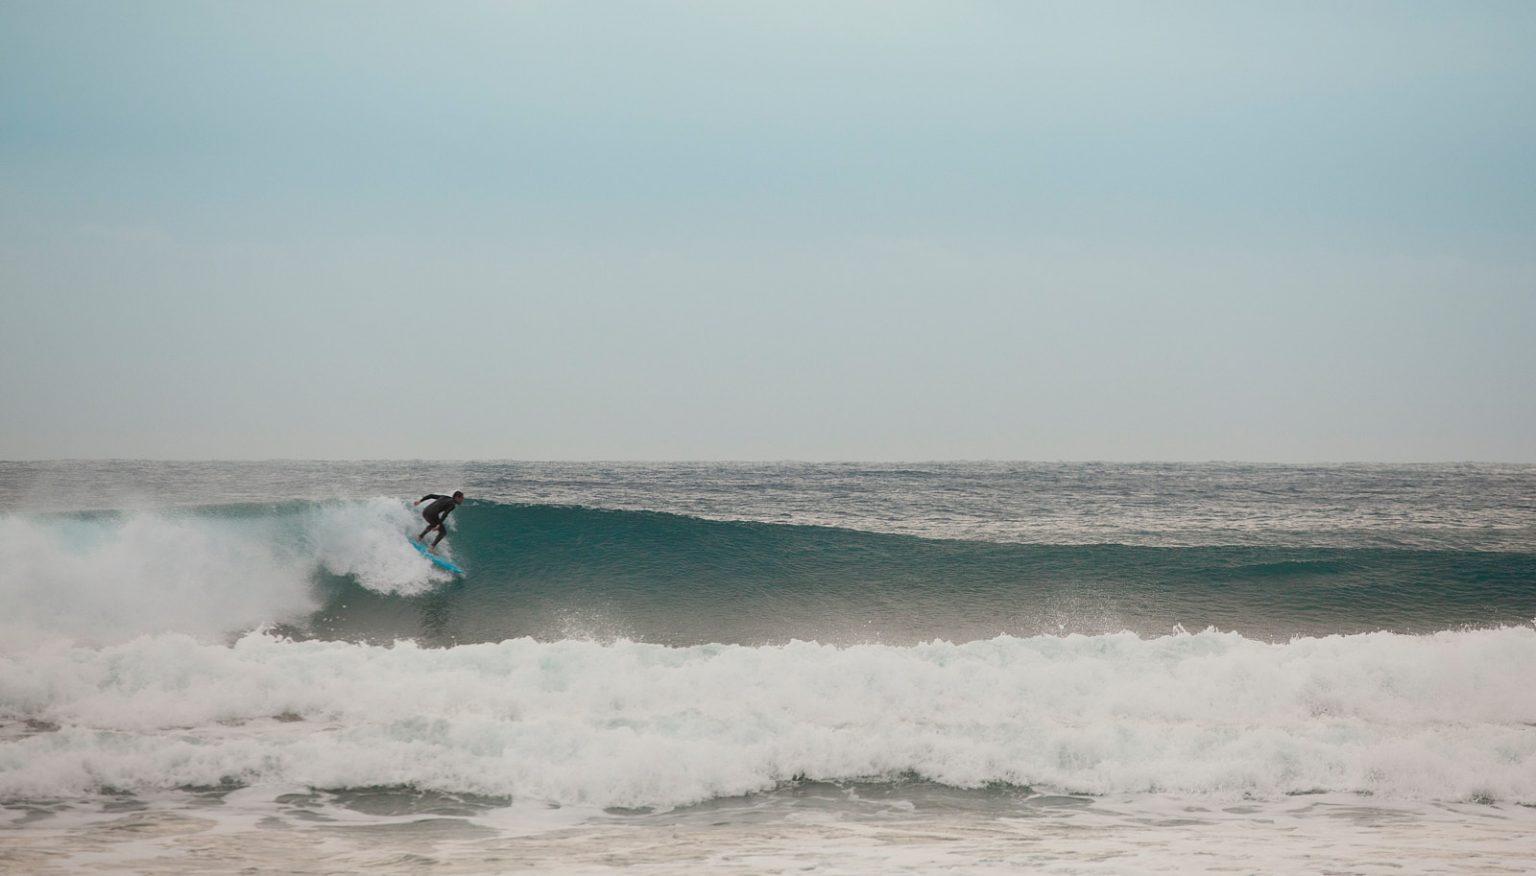 Surfing at Donghe, Taidong. By Craig Ferguson